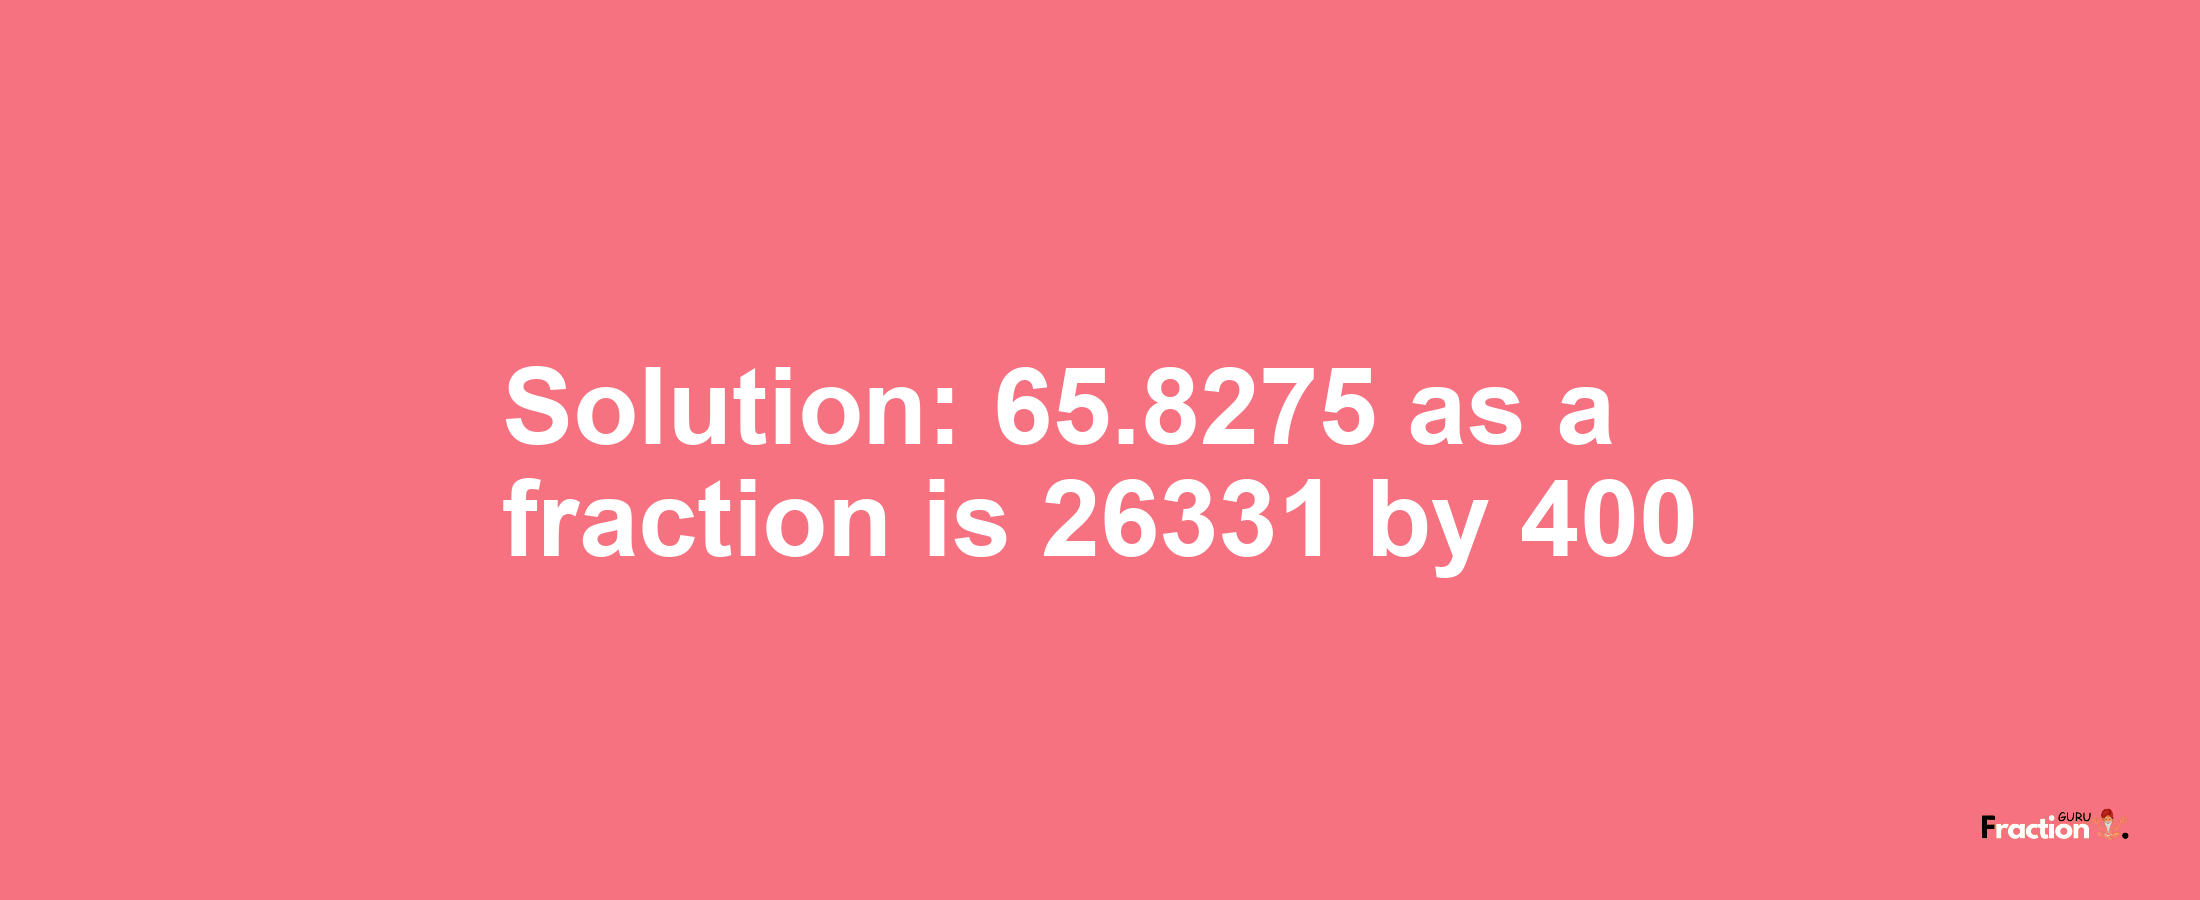 Solution:65.8275 as a fraction is 26331/400